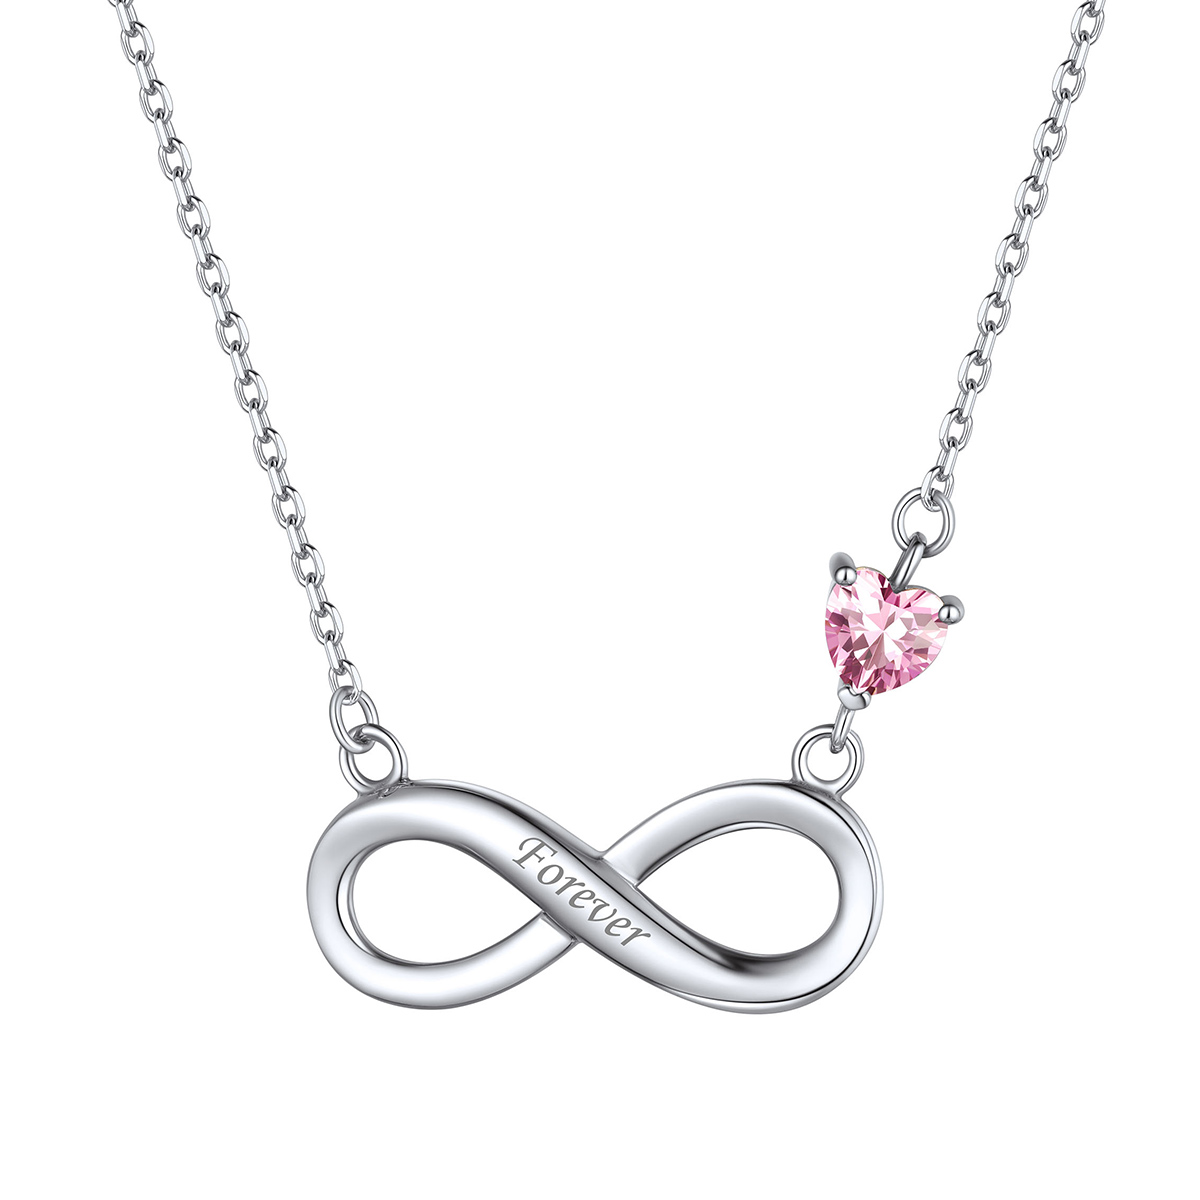 ChicSilver Sterling Silver Infinity Name Necklace With Birthstone For Women Girls